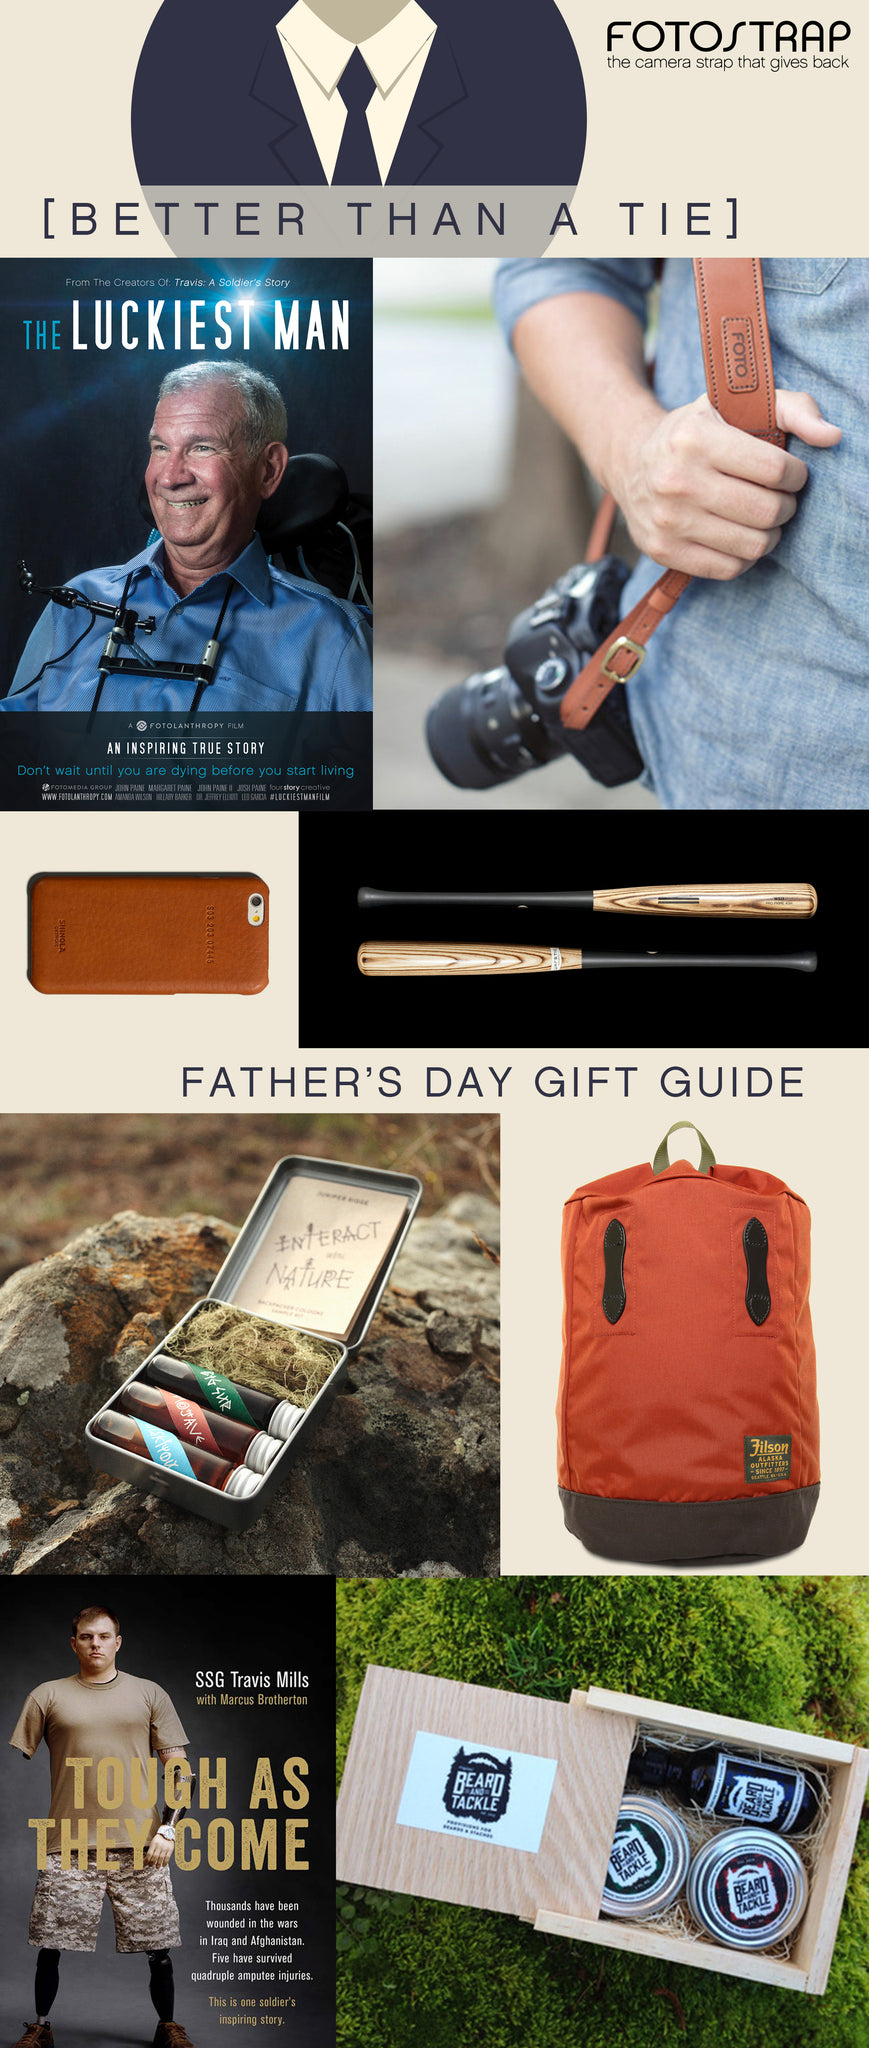 Better than a Tie Father's Day Gift Guide | FOTO Blog